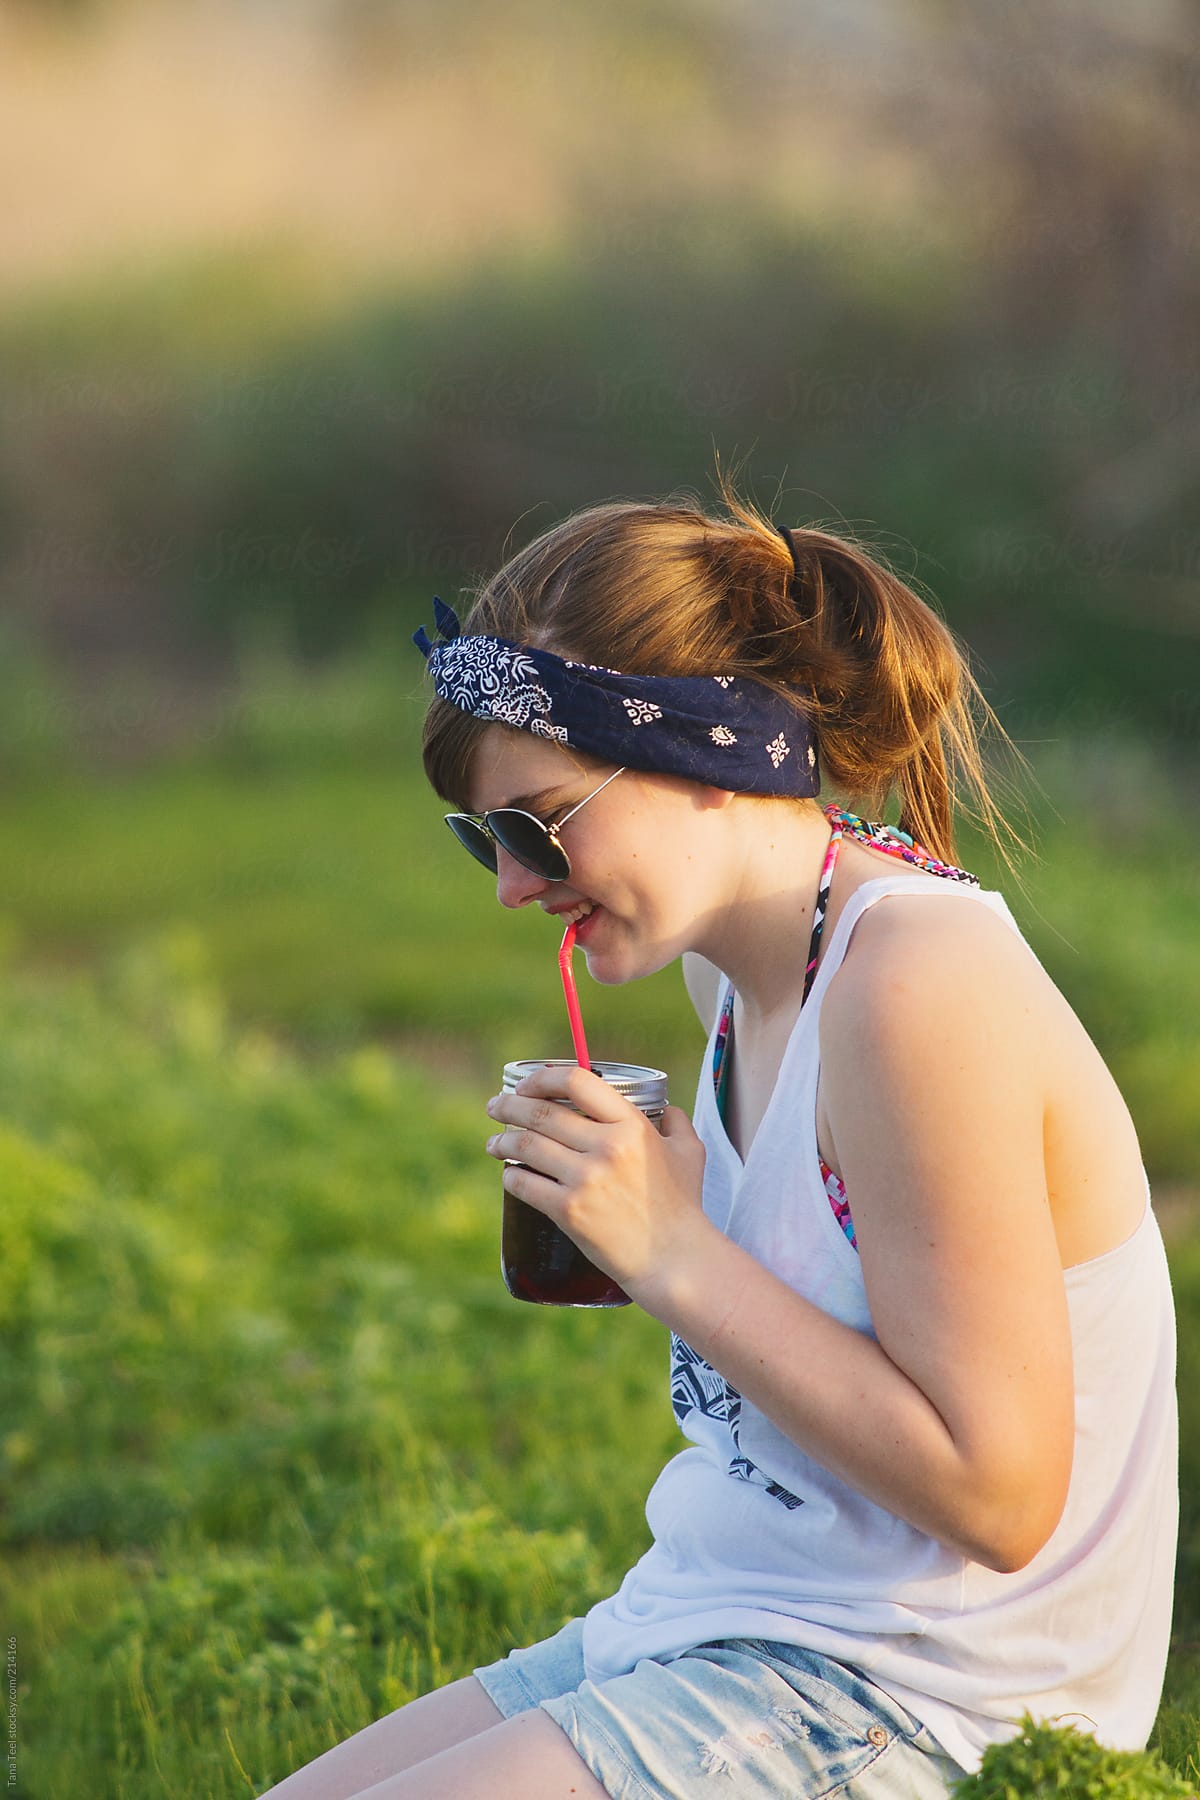 Teen girl sipping her drink from a straw in a jar on a summer day